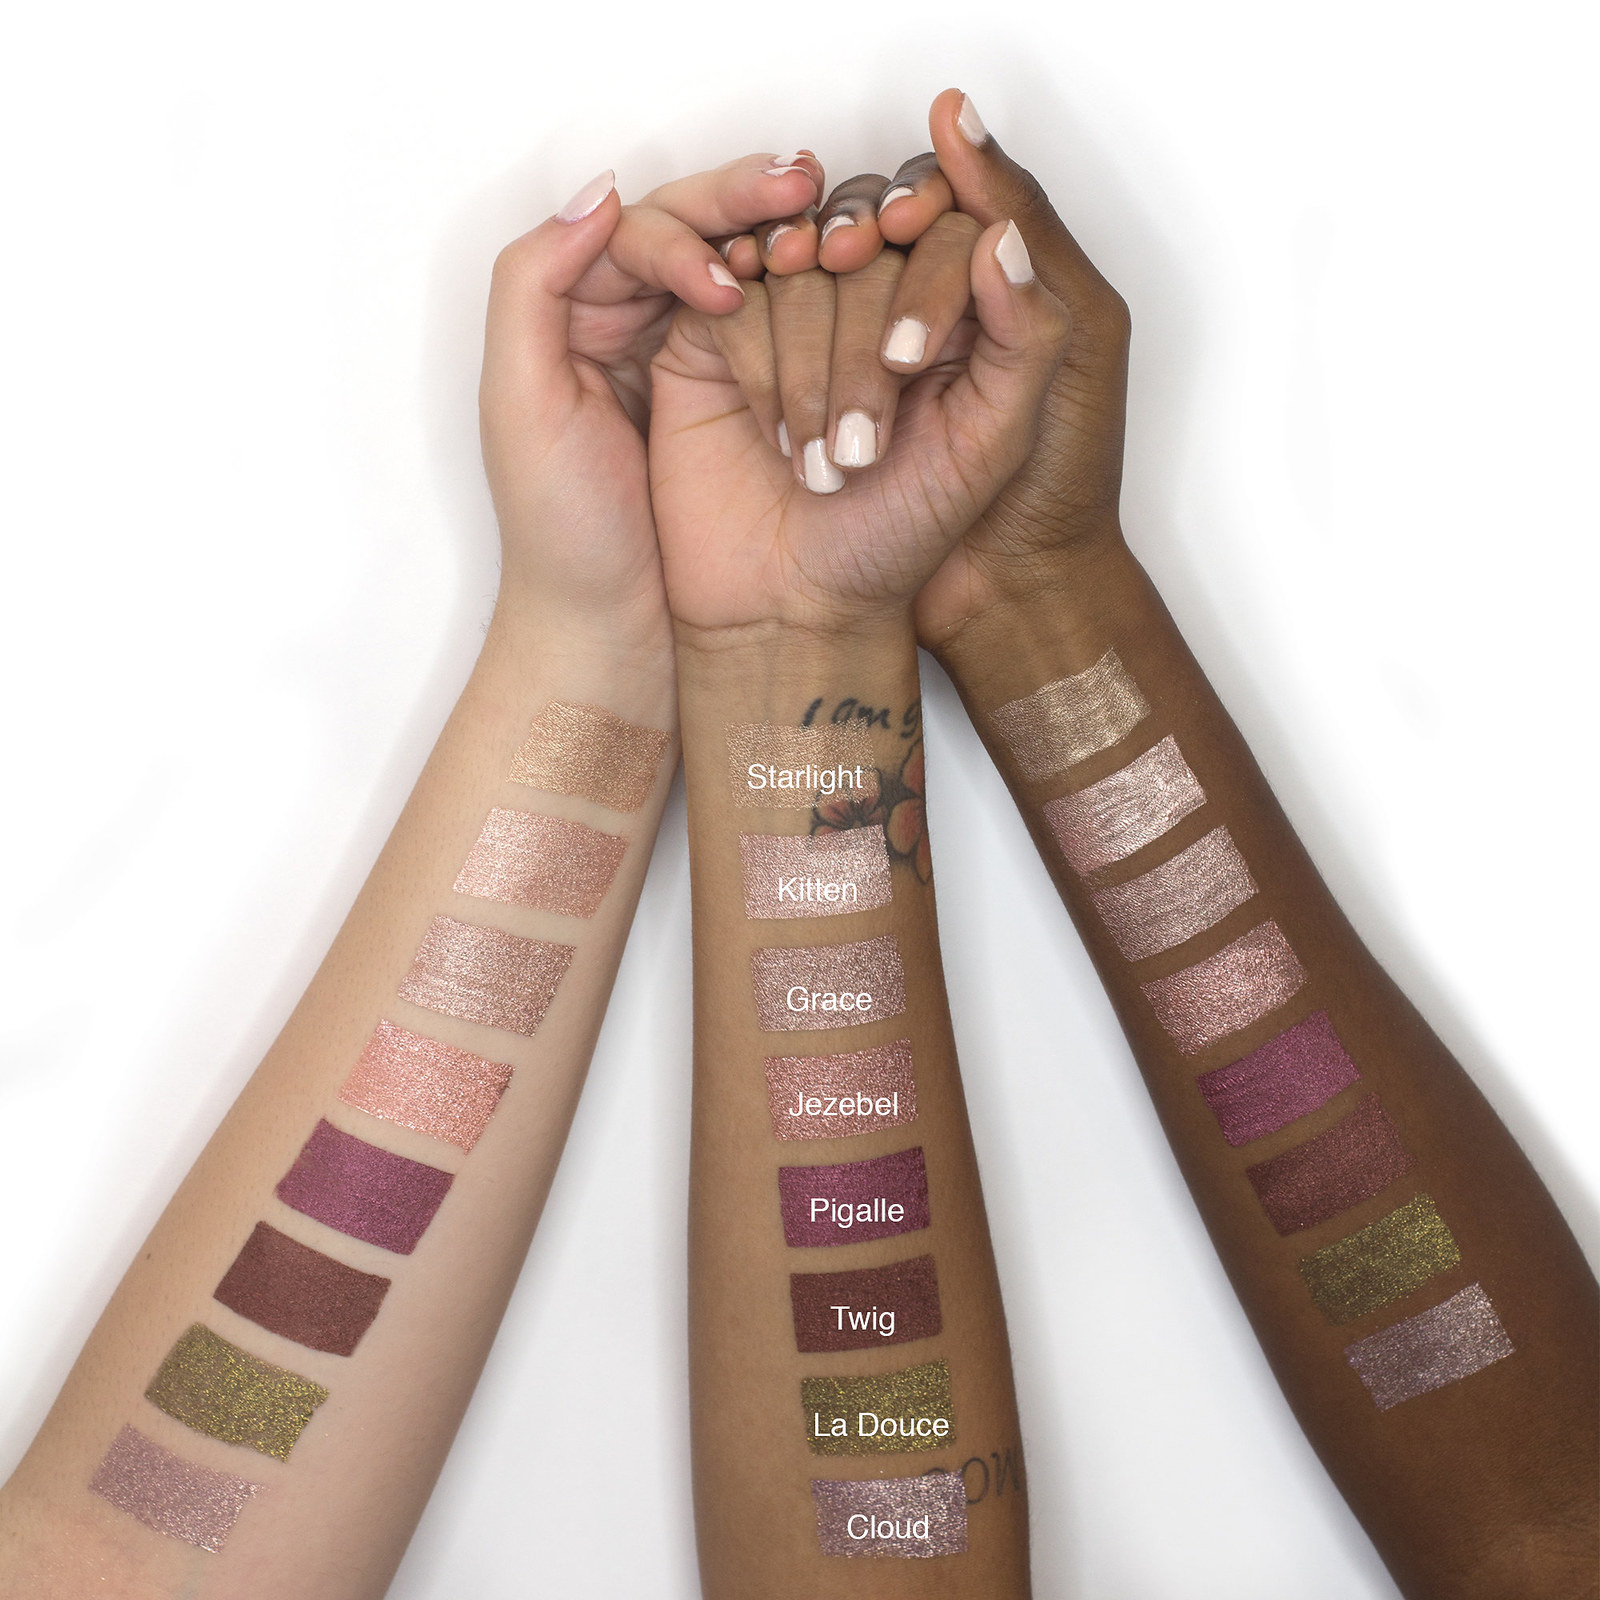 Three arms with different skin tones showing swatches of eight colors, including gold, rose gold, purples, and greens